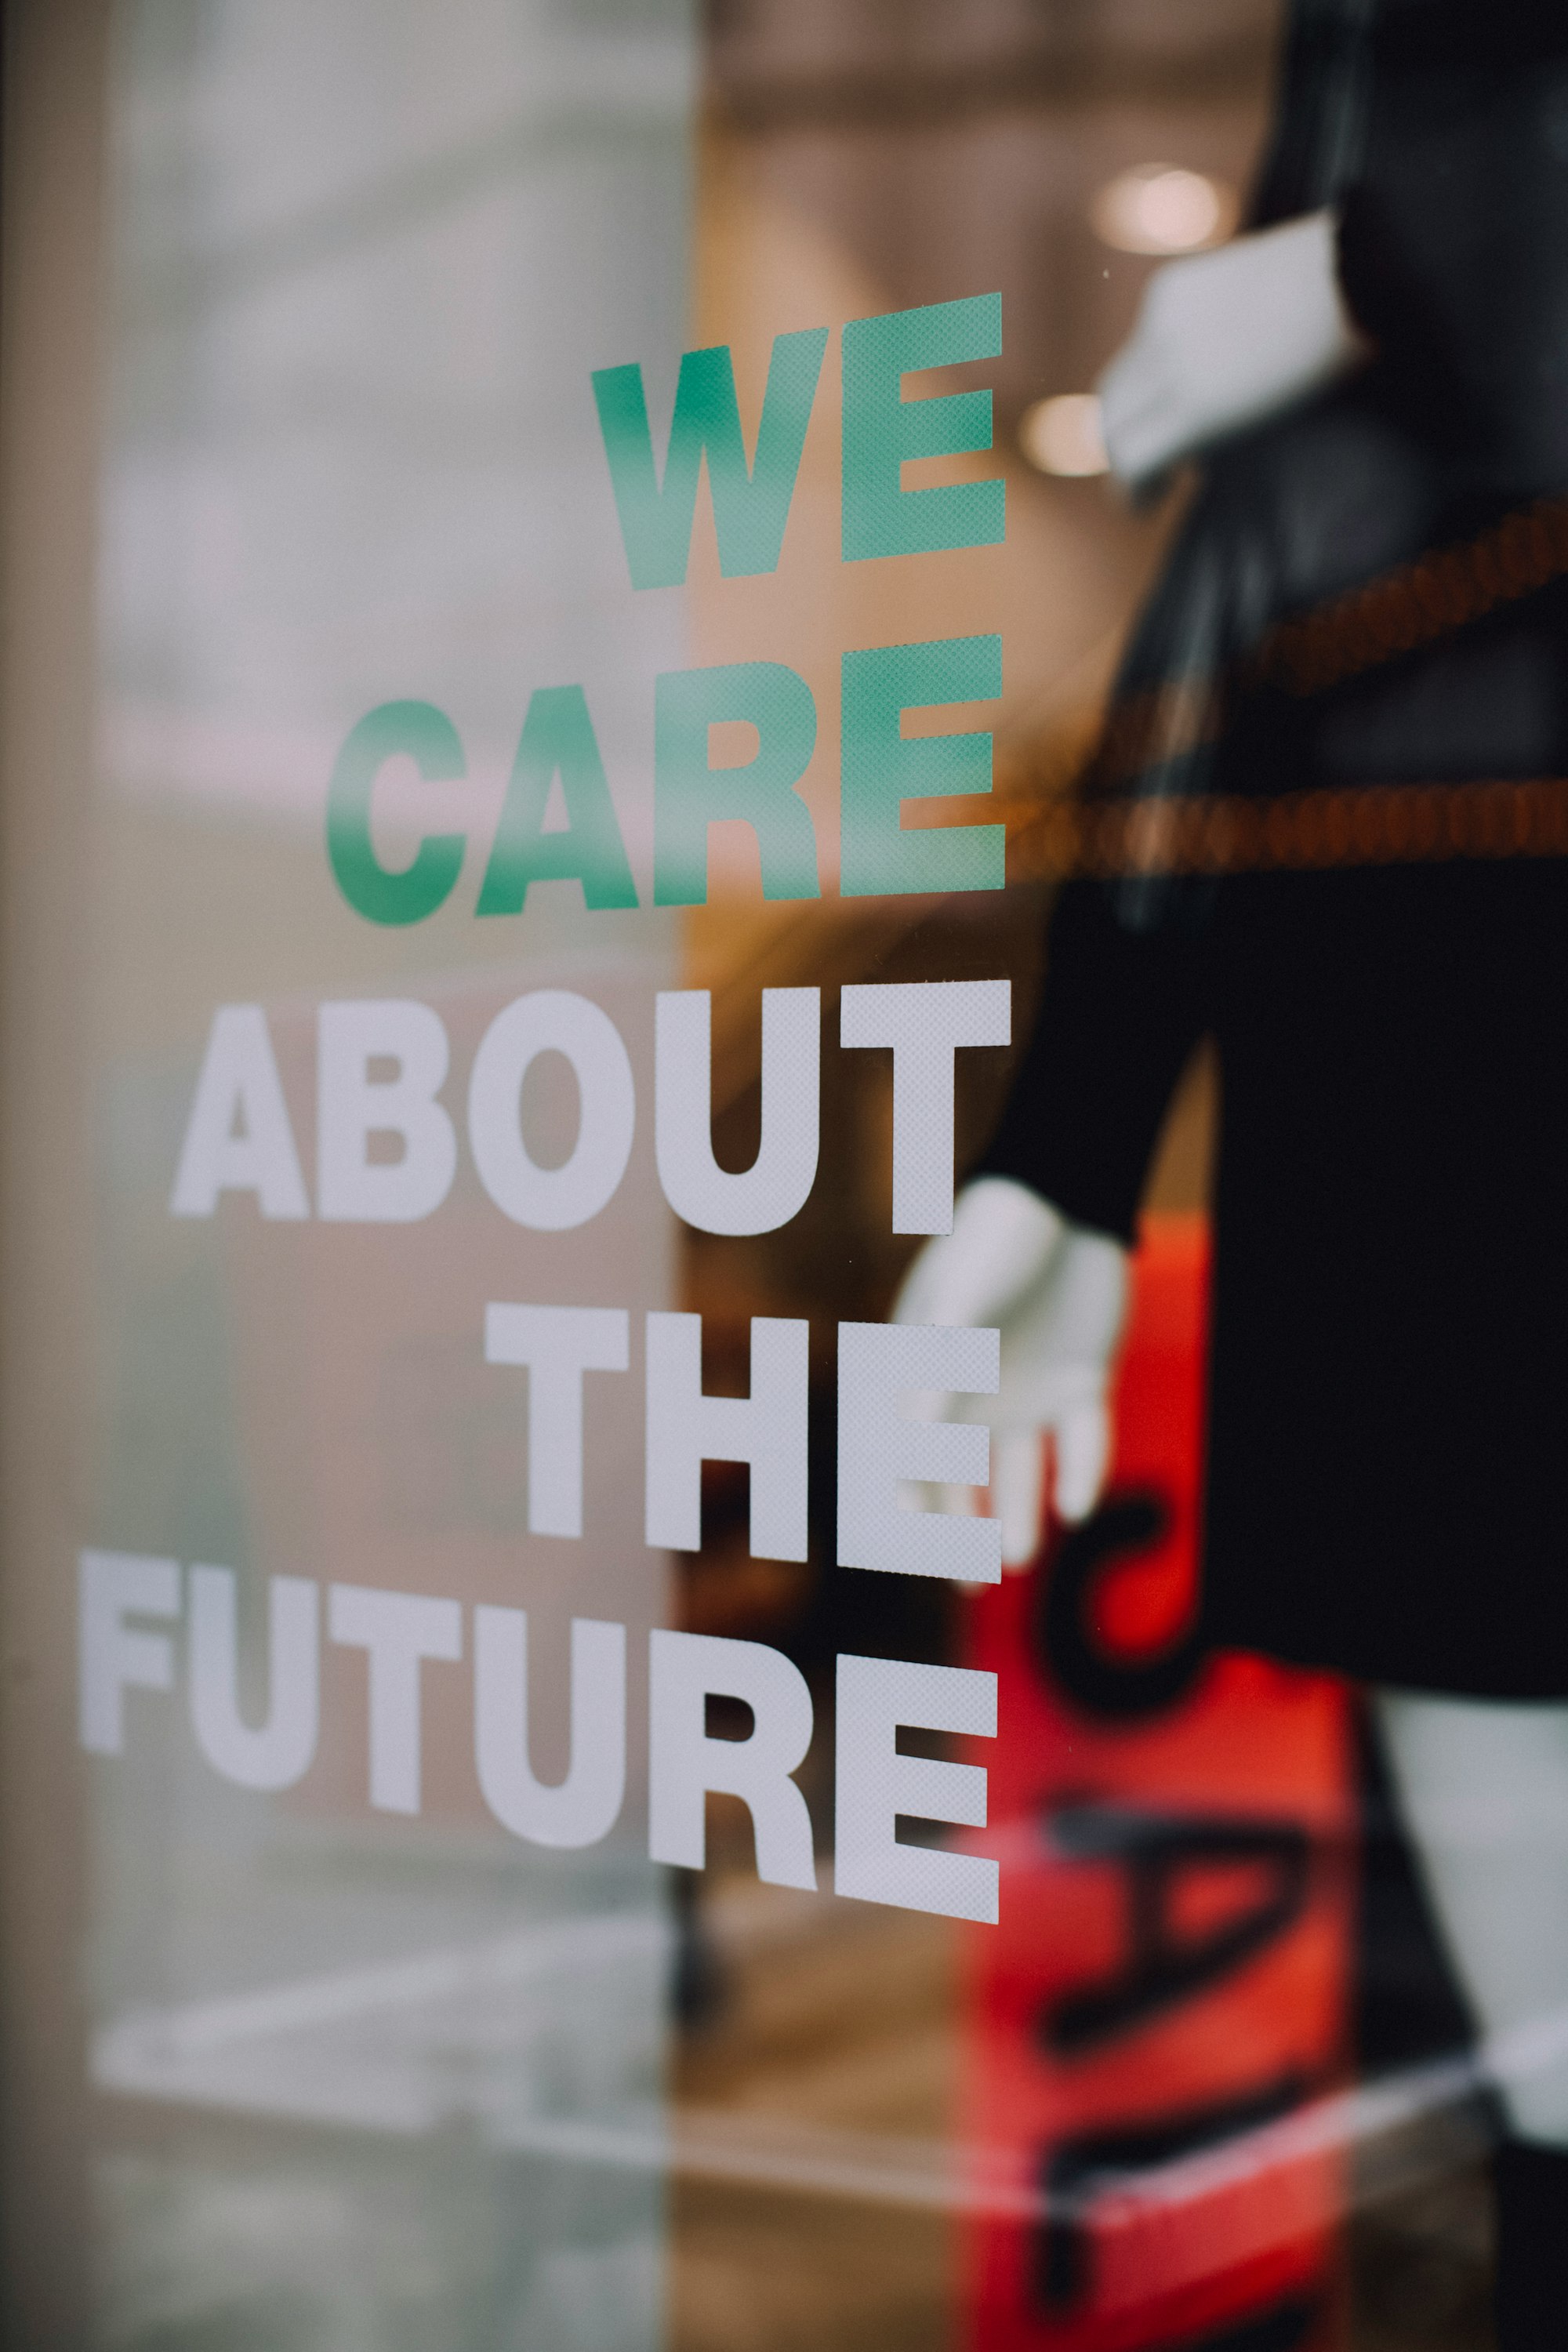 showcase display window "WE CARE ABOUT THE FUTURE"